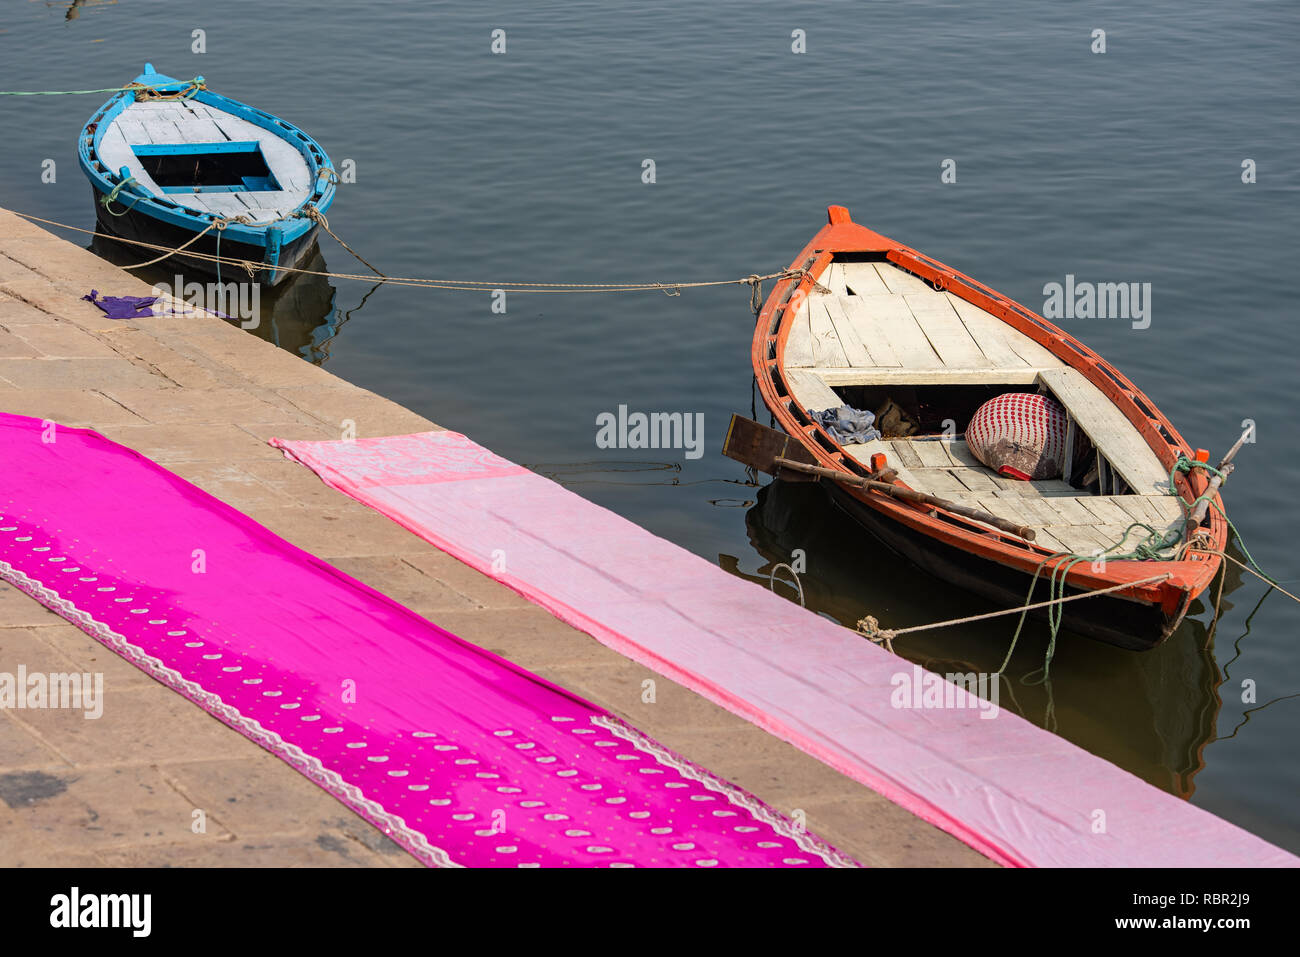 Two boats on the Ganges in the sunshine with two long dhotis or sarees drying on the paving in the foreground: photo taken in Varanasi, India Stock Photo